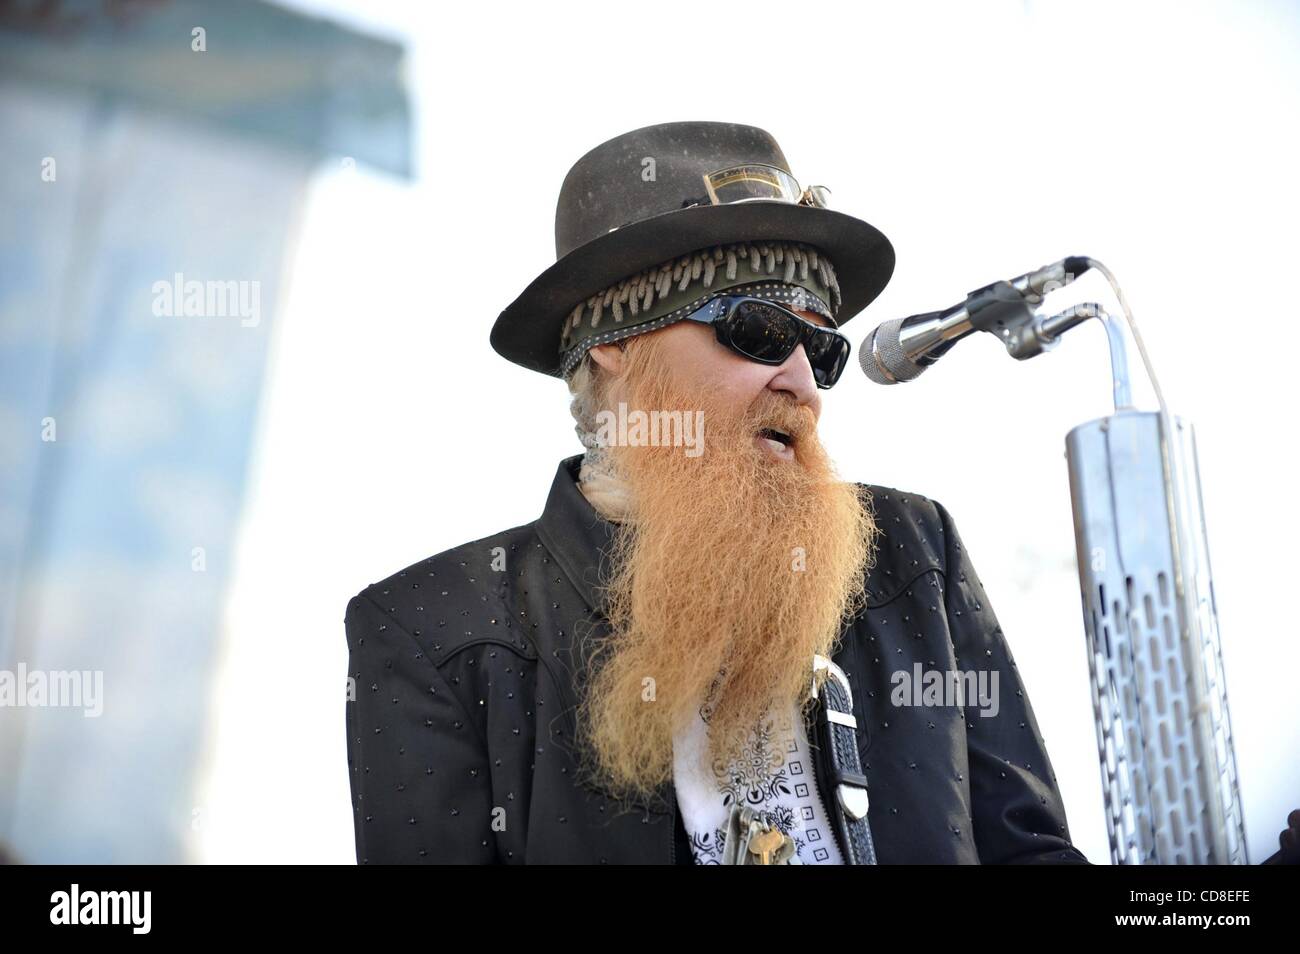 Oct 26, 2008 - Pomona, California, U.S. - ZZ Top singer and guitarist BILLY GIBBONS performs at the world famous Love Ride as they help celebrate the 25th anniversary as the largest 1-day motorcycle fundraiser at Fairplex. (Credit Image: © Steven K. Doi/ZUMApress.com) Stock Photo